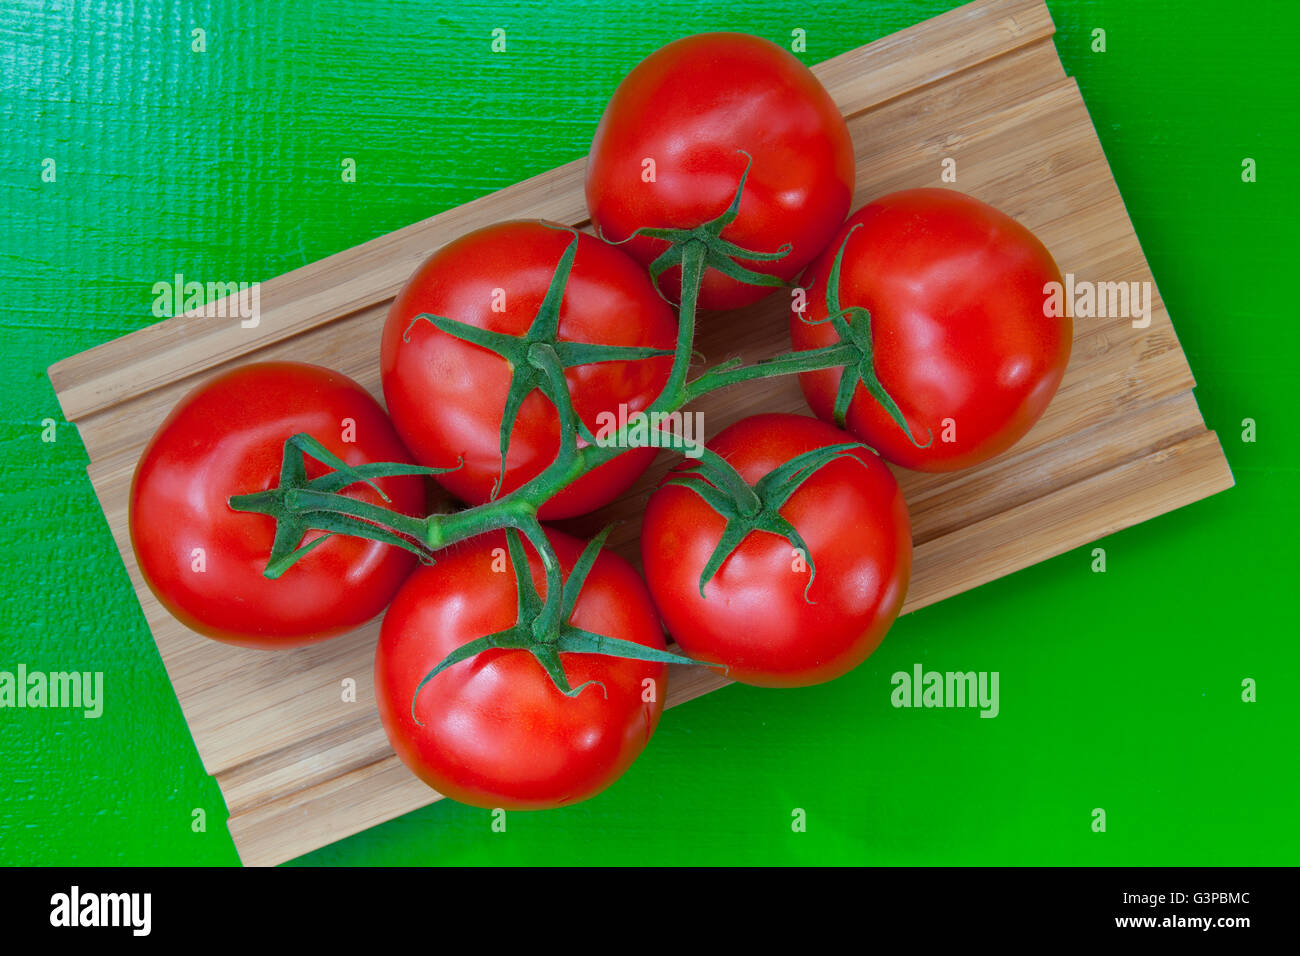 Red tomatoes on the wooden desk Stock Photo